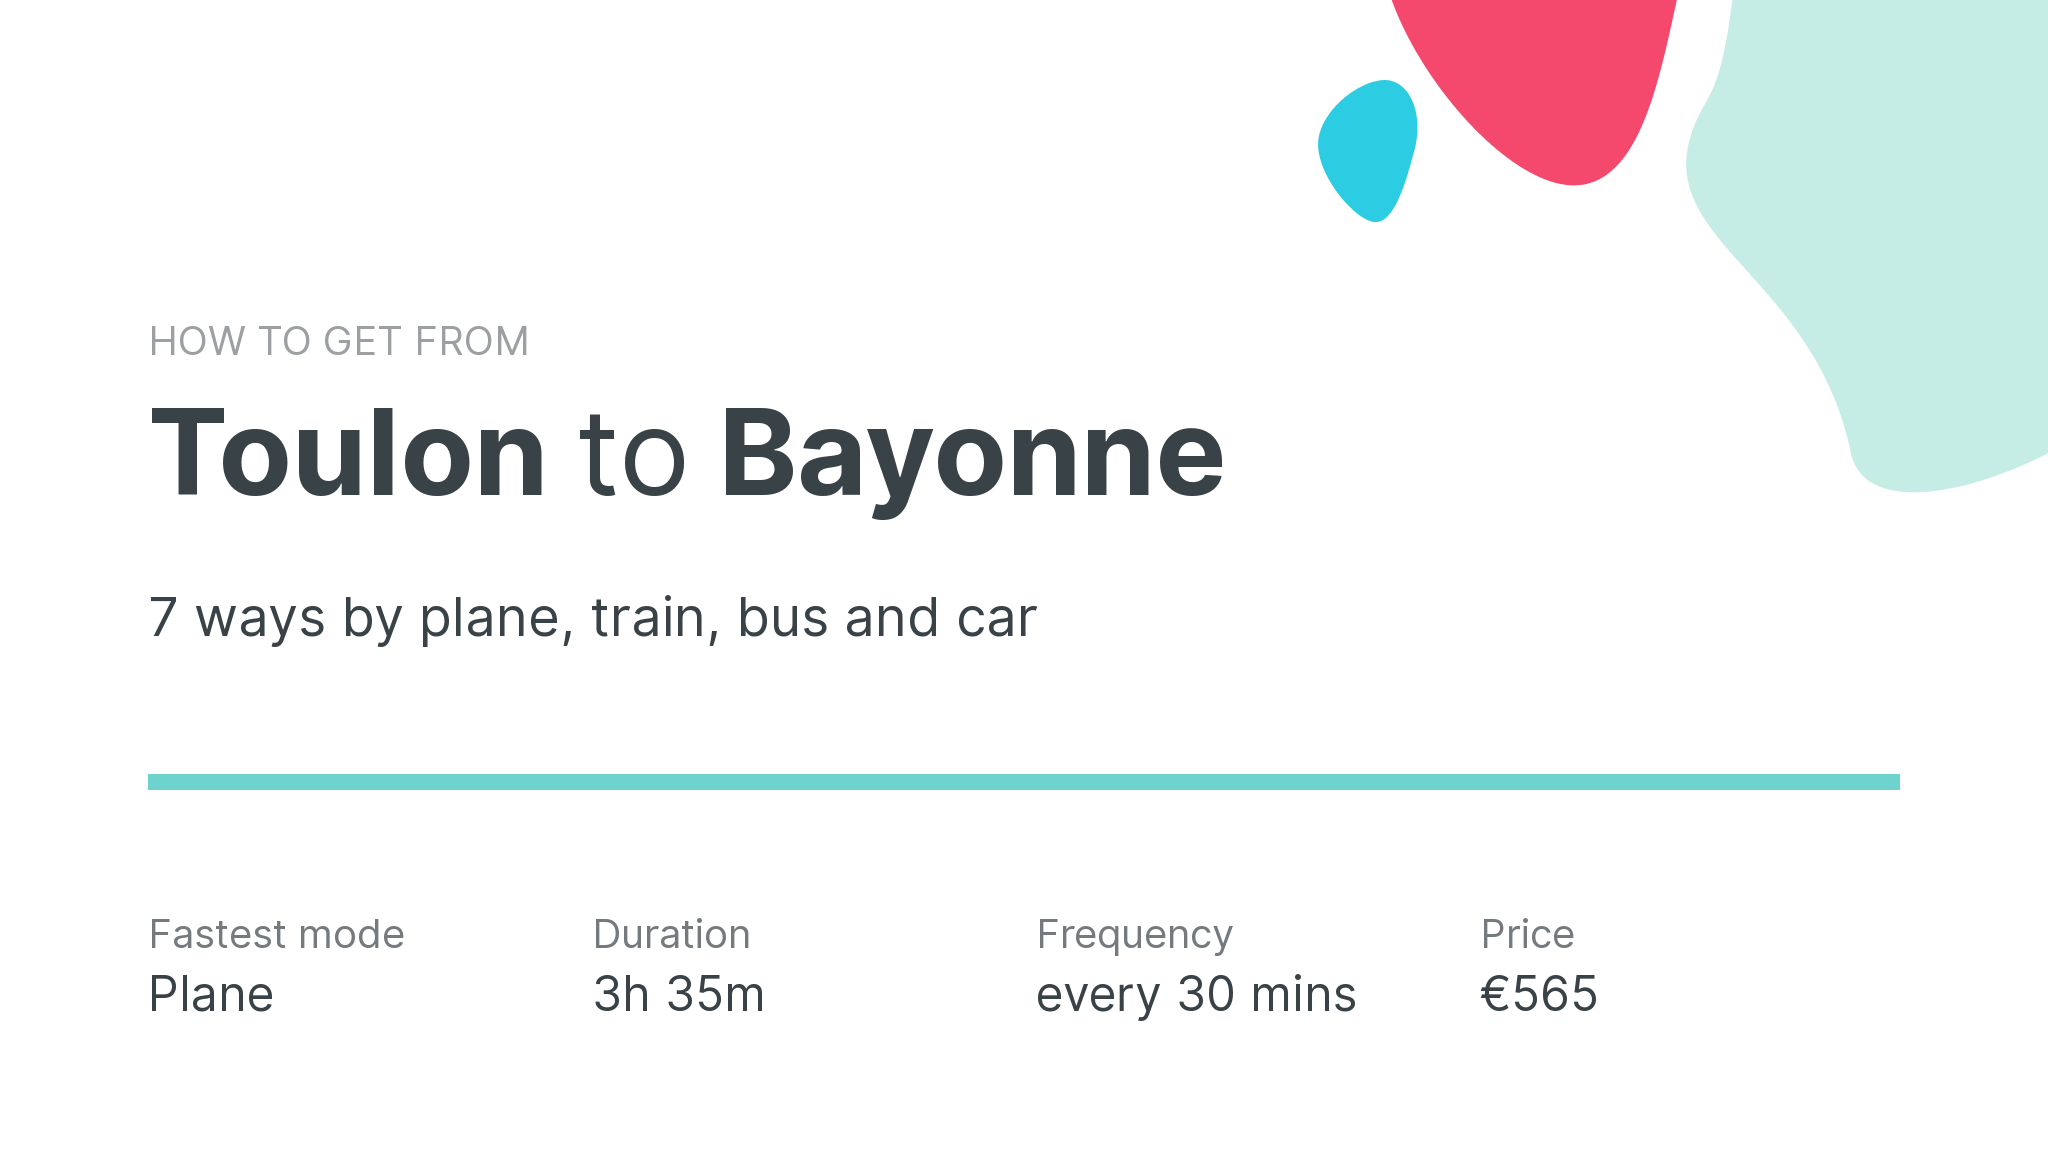 How do I get from Toulon to Bayonne